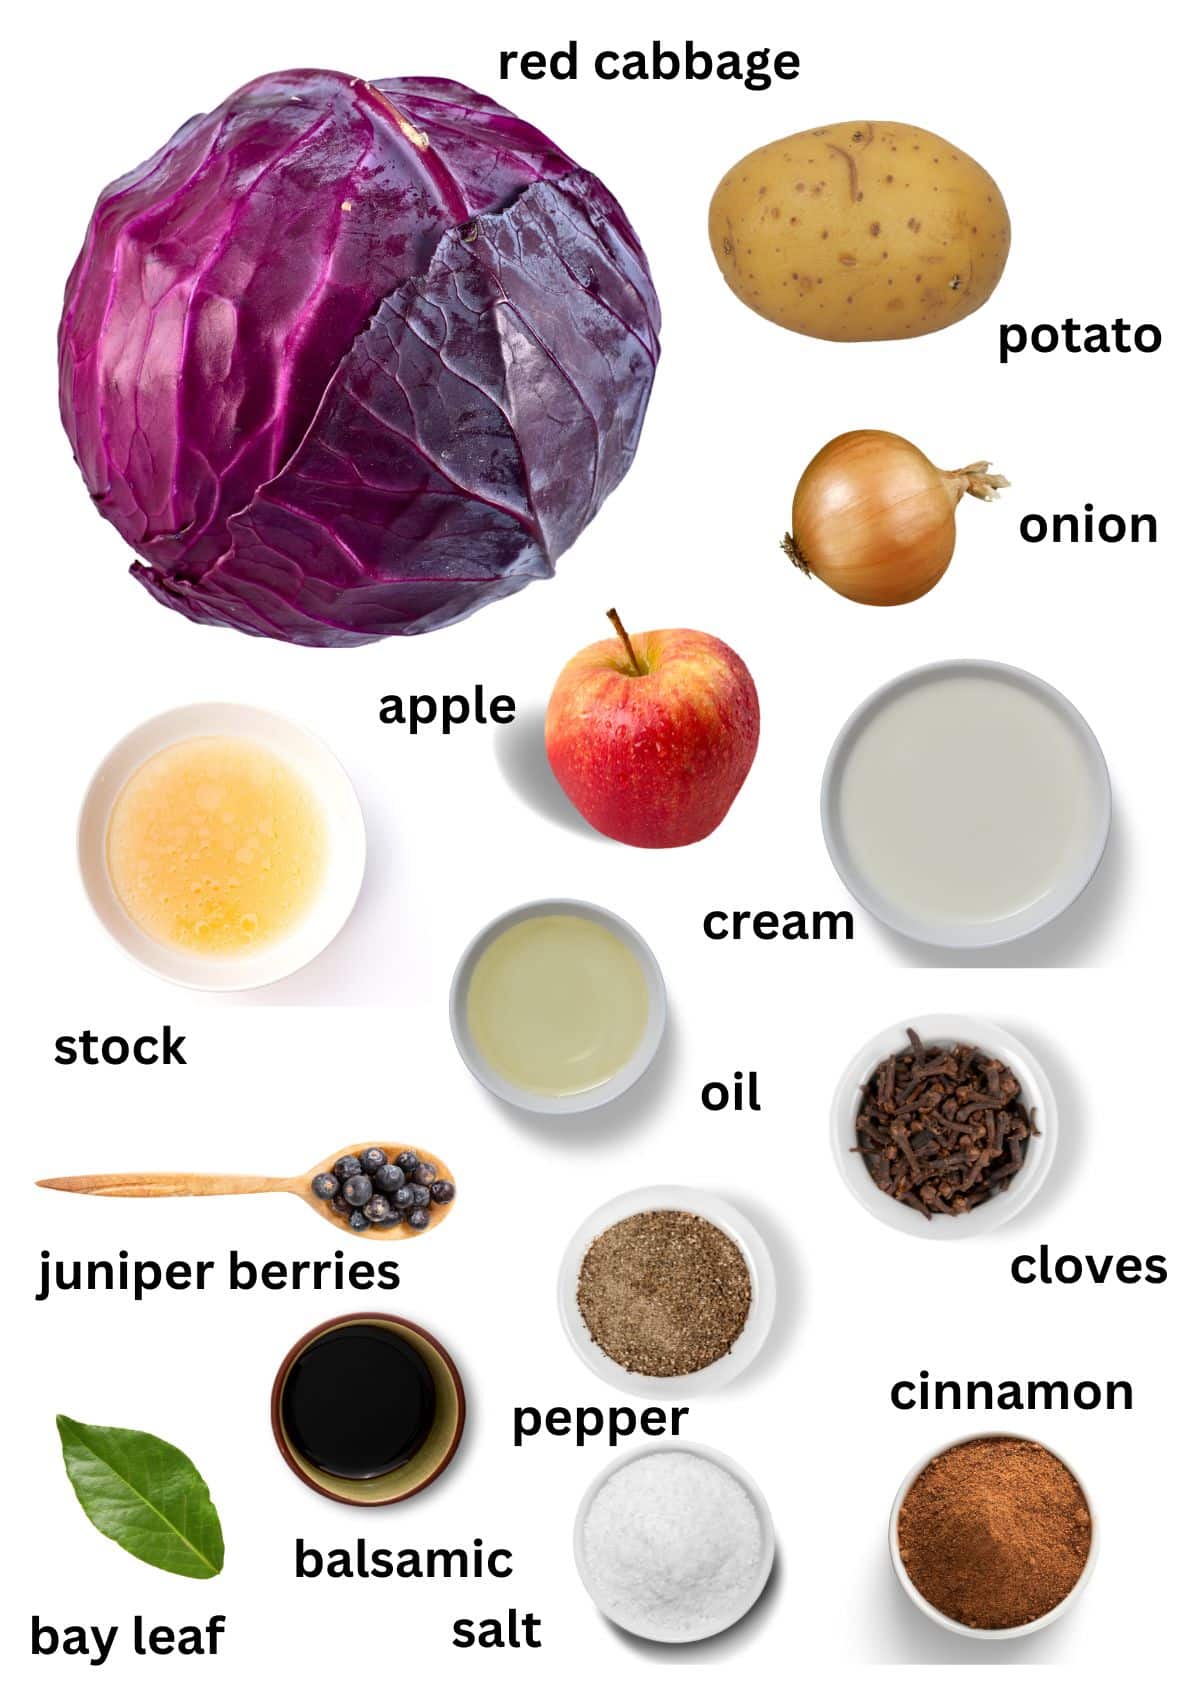 listed ingredients for making soup with red cabbage, apples and potatoes.